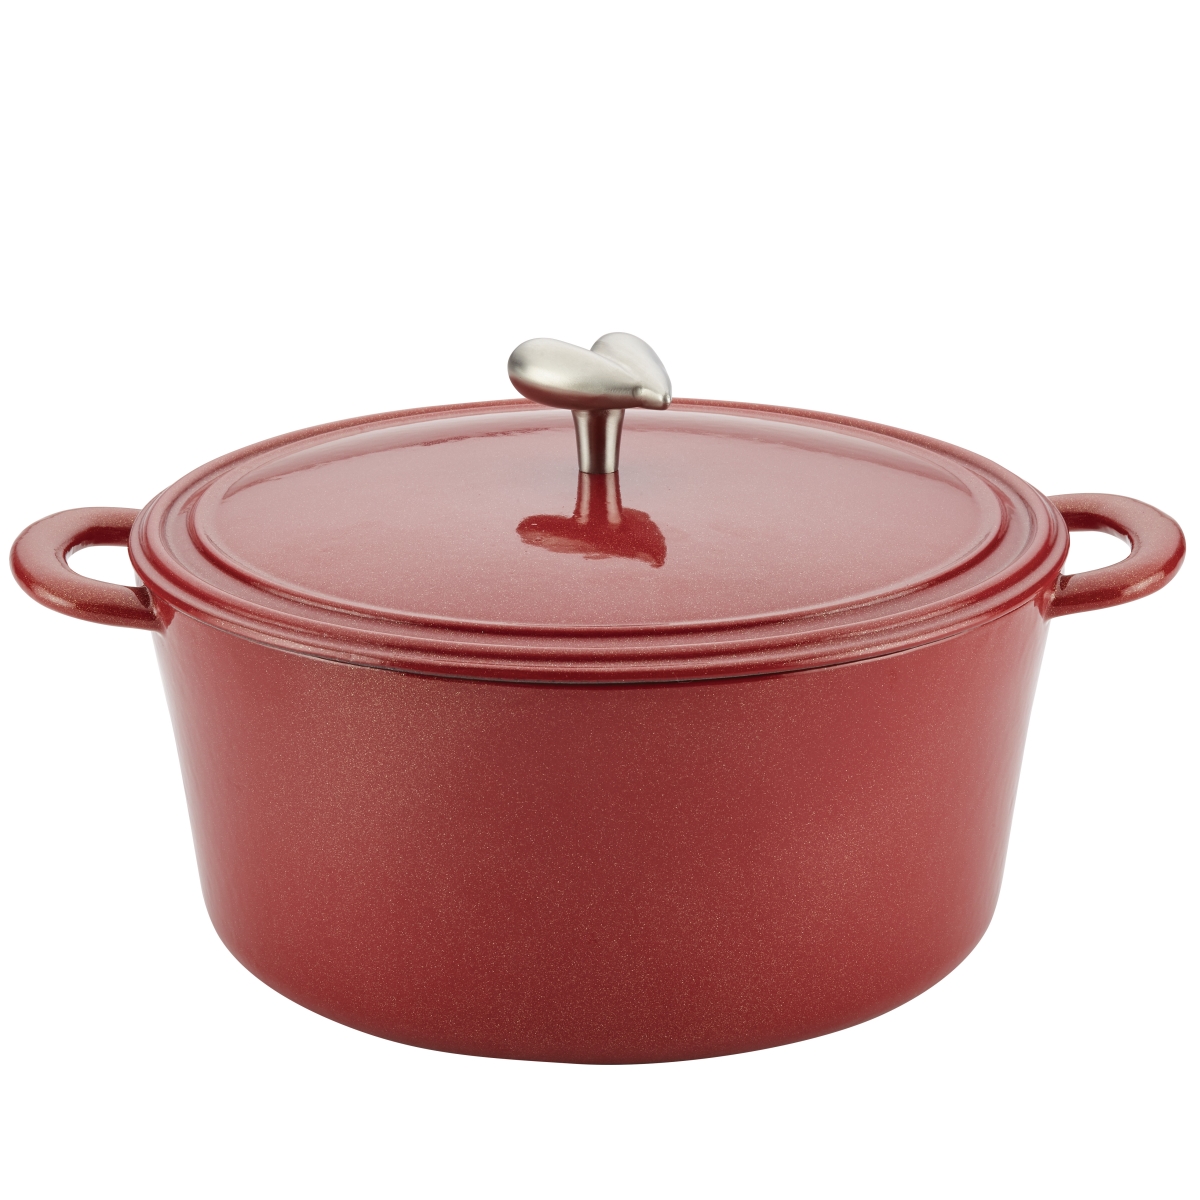 47177 Cast Iron Enamel Covered Dutch Oven, 6 Qt. - Sienna Red